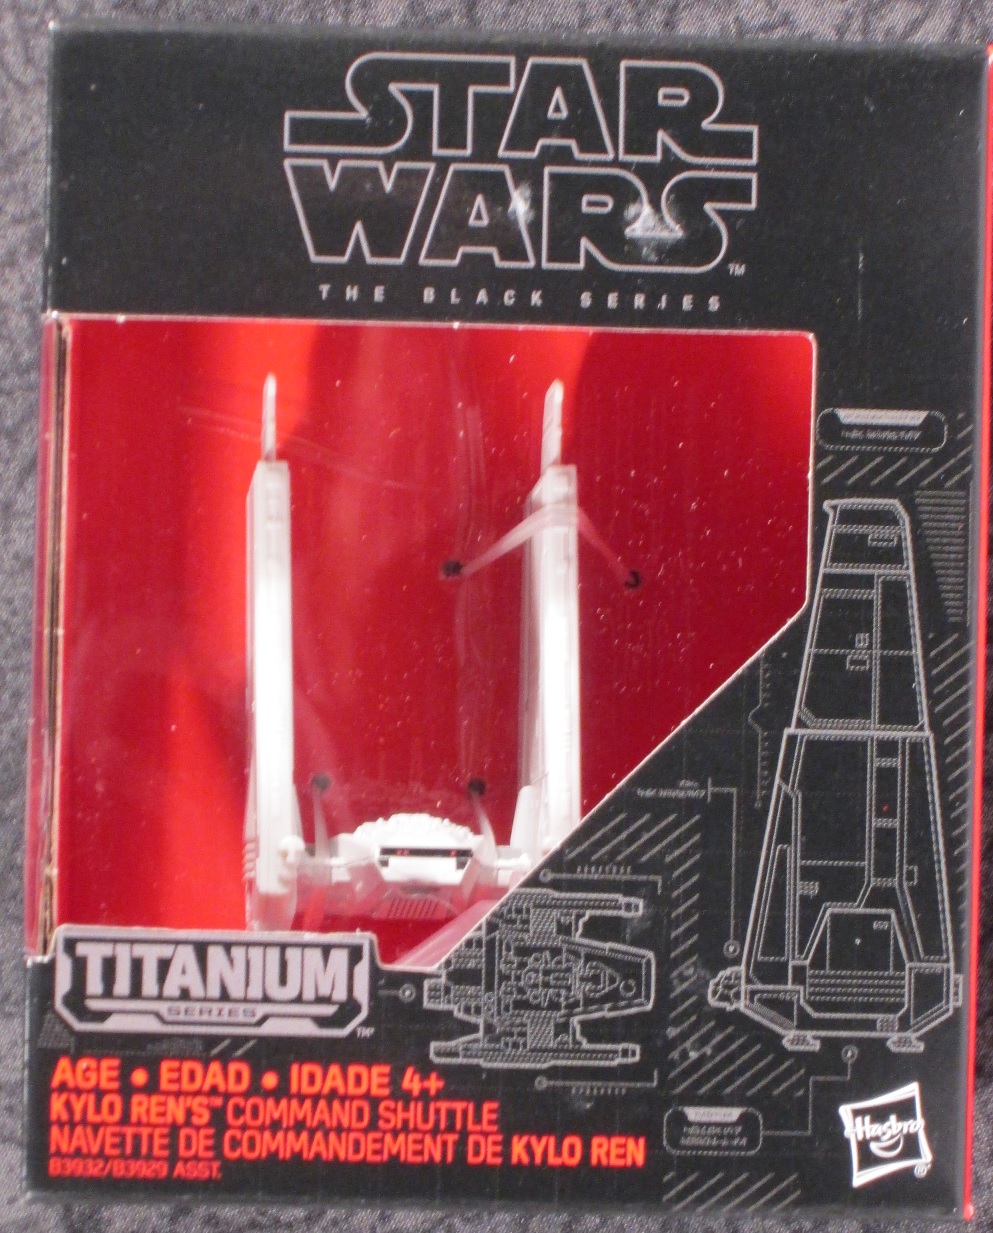 Colors May Vary Star Wars The Force Awakens Black Series Titanium Kylo Ren’s Command Shuttle 